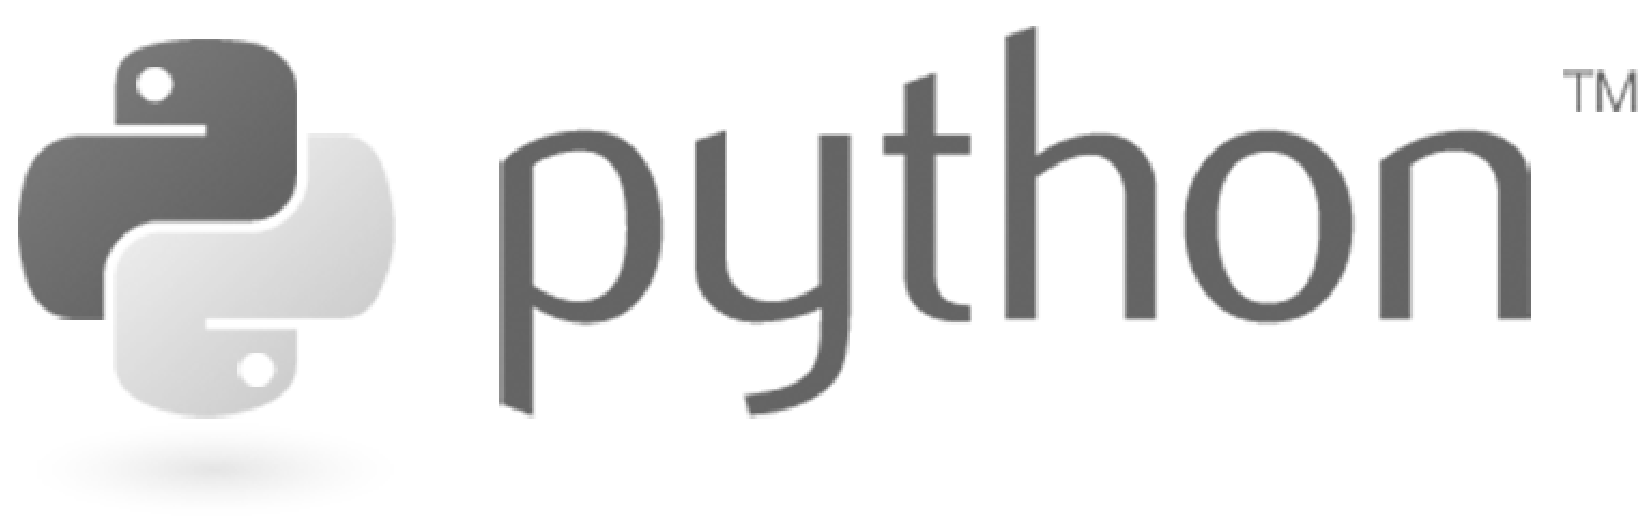 http://Python%20Outsourcing